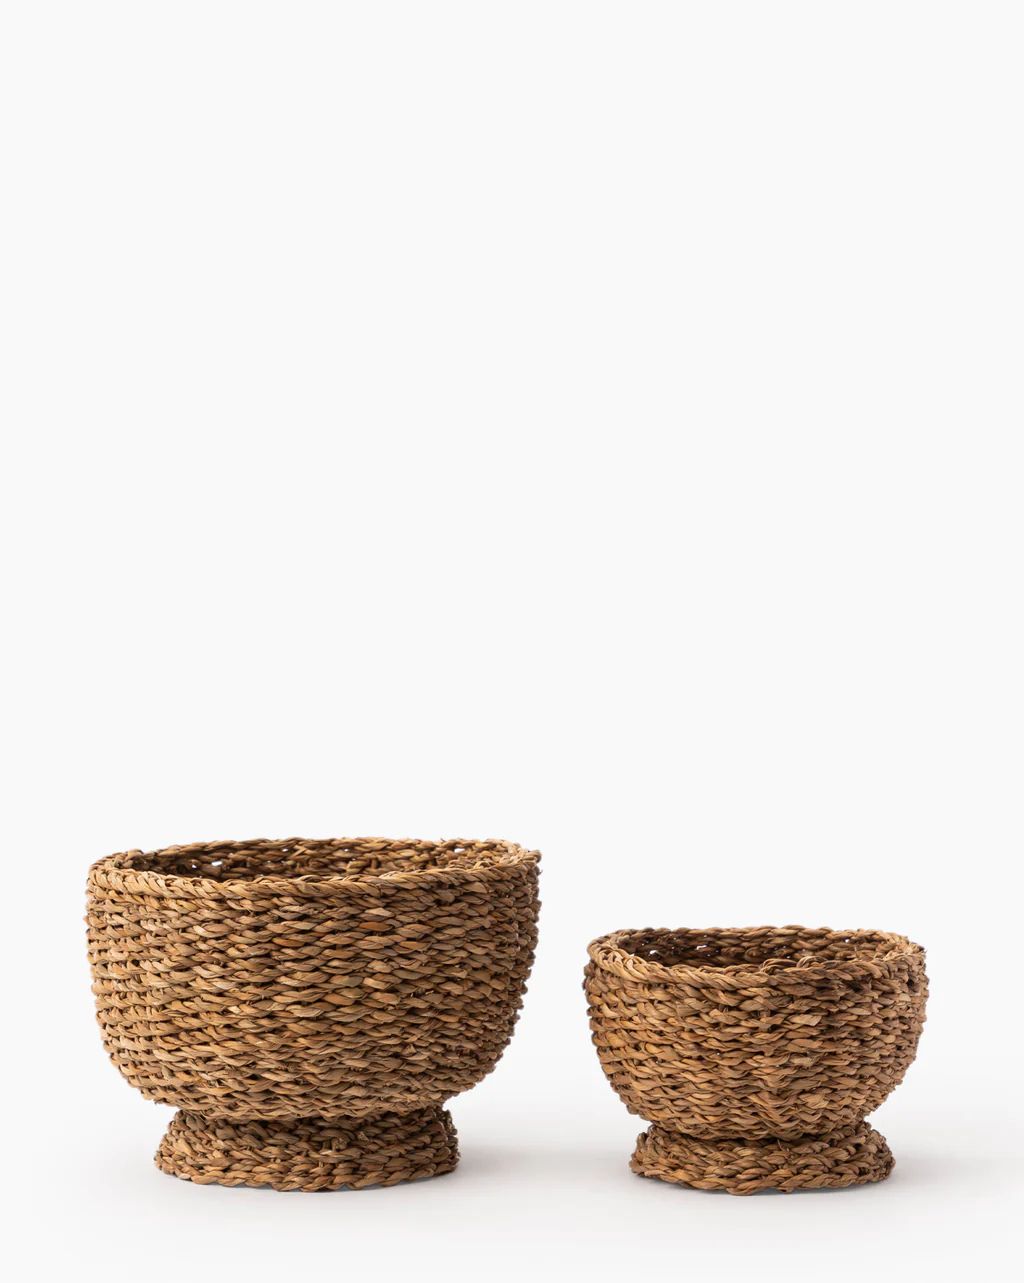 Seagrass Footed Bowl | McGee & Co.